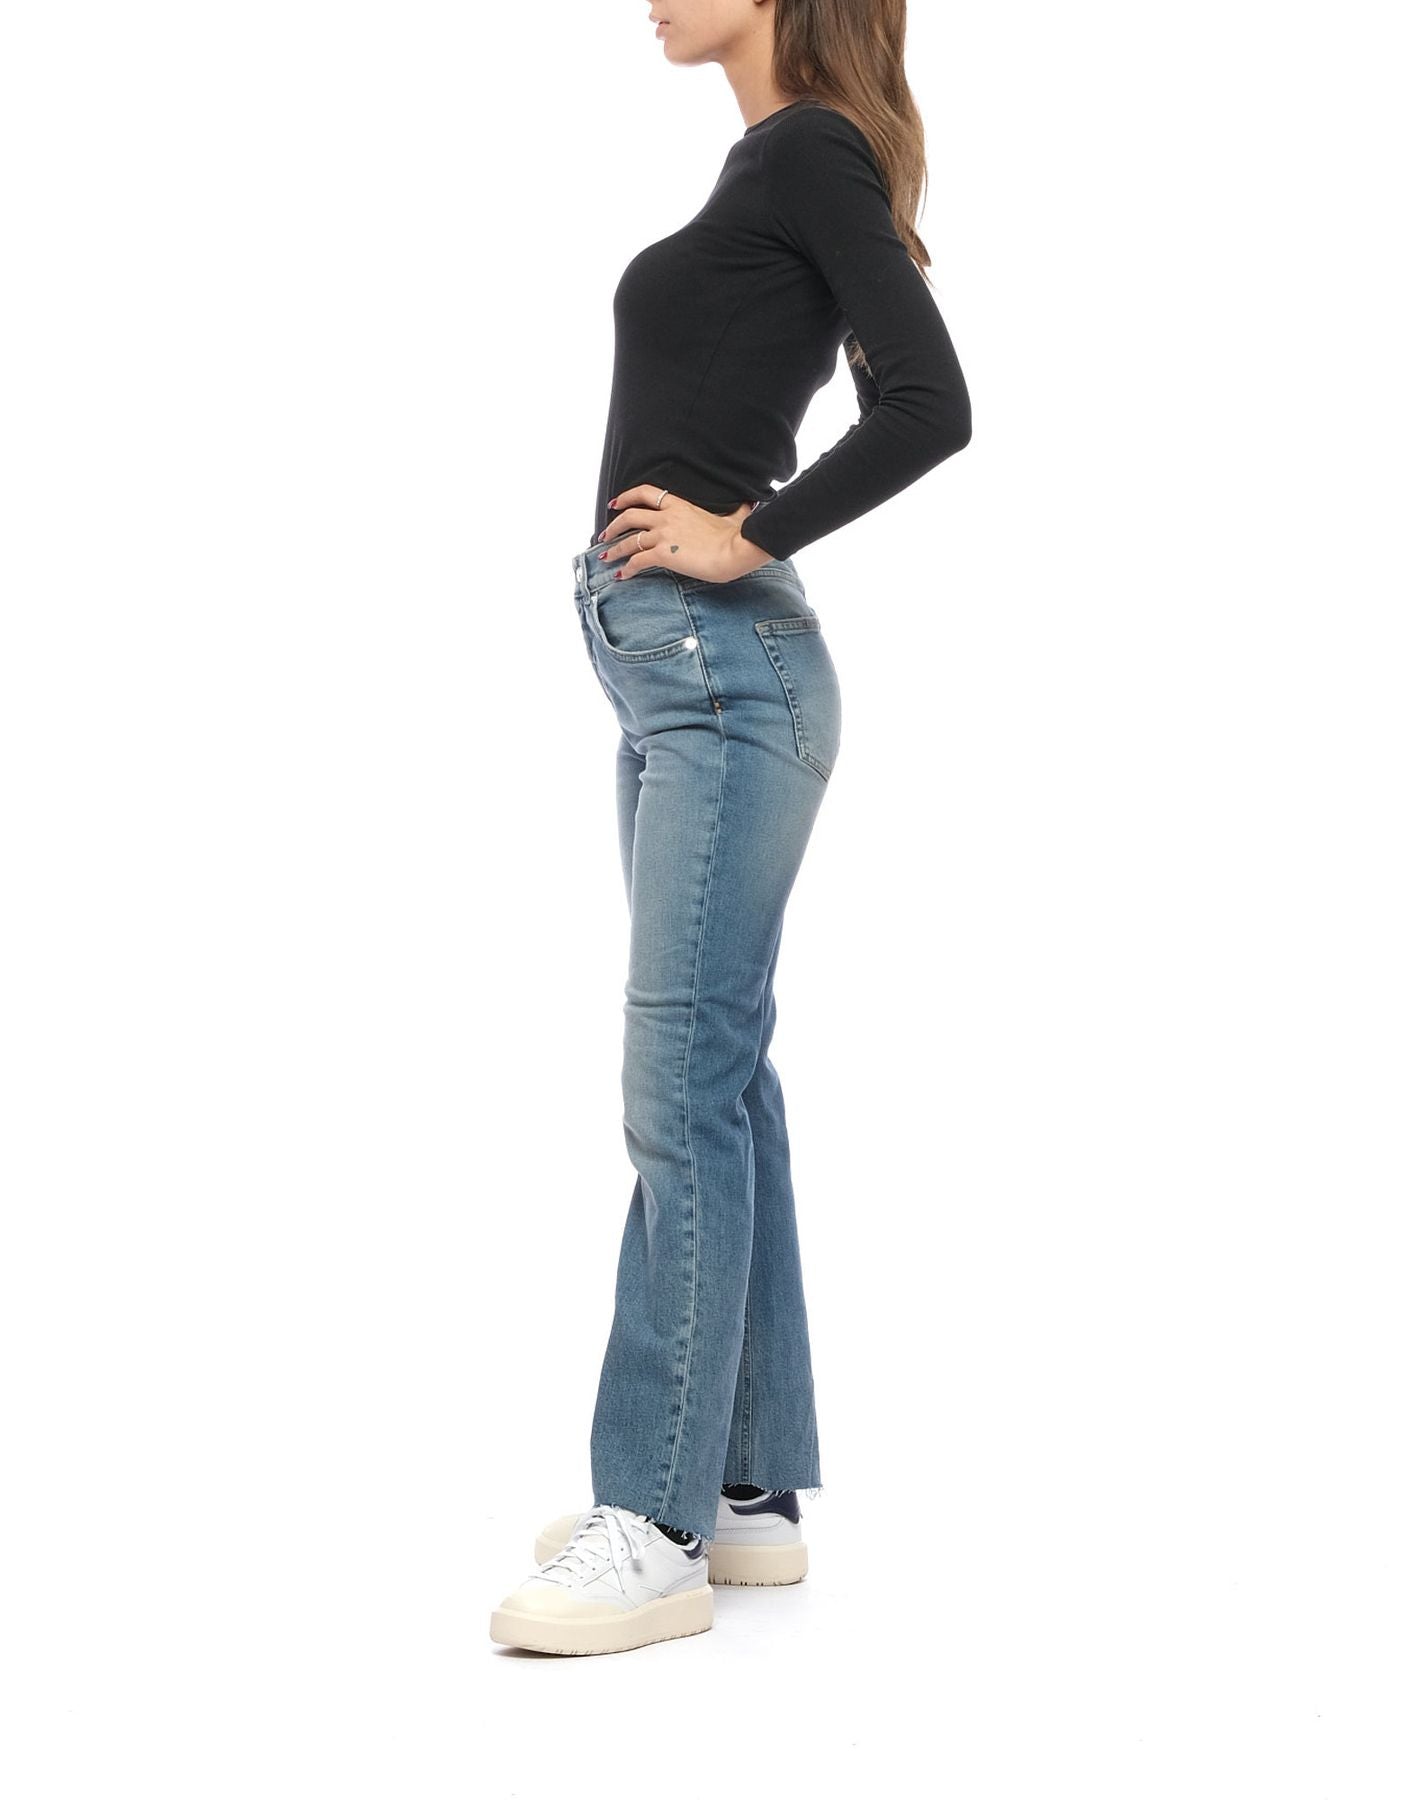 Jeans woman pis pea01 0056 NINE:INTHE:MORNING